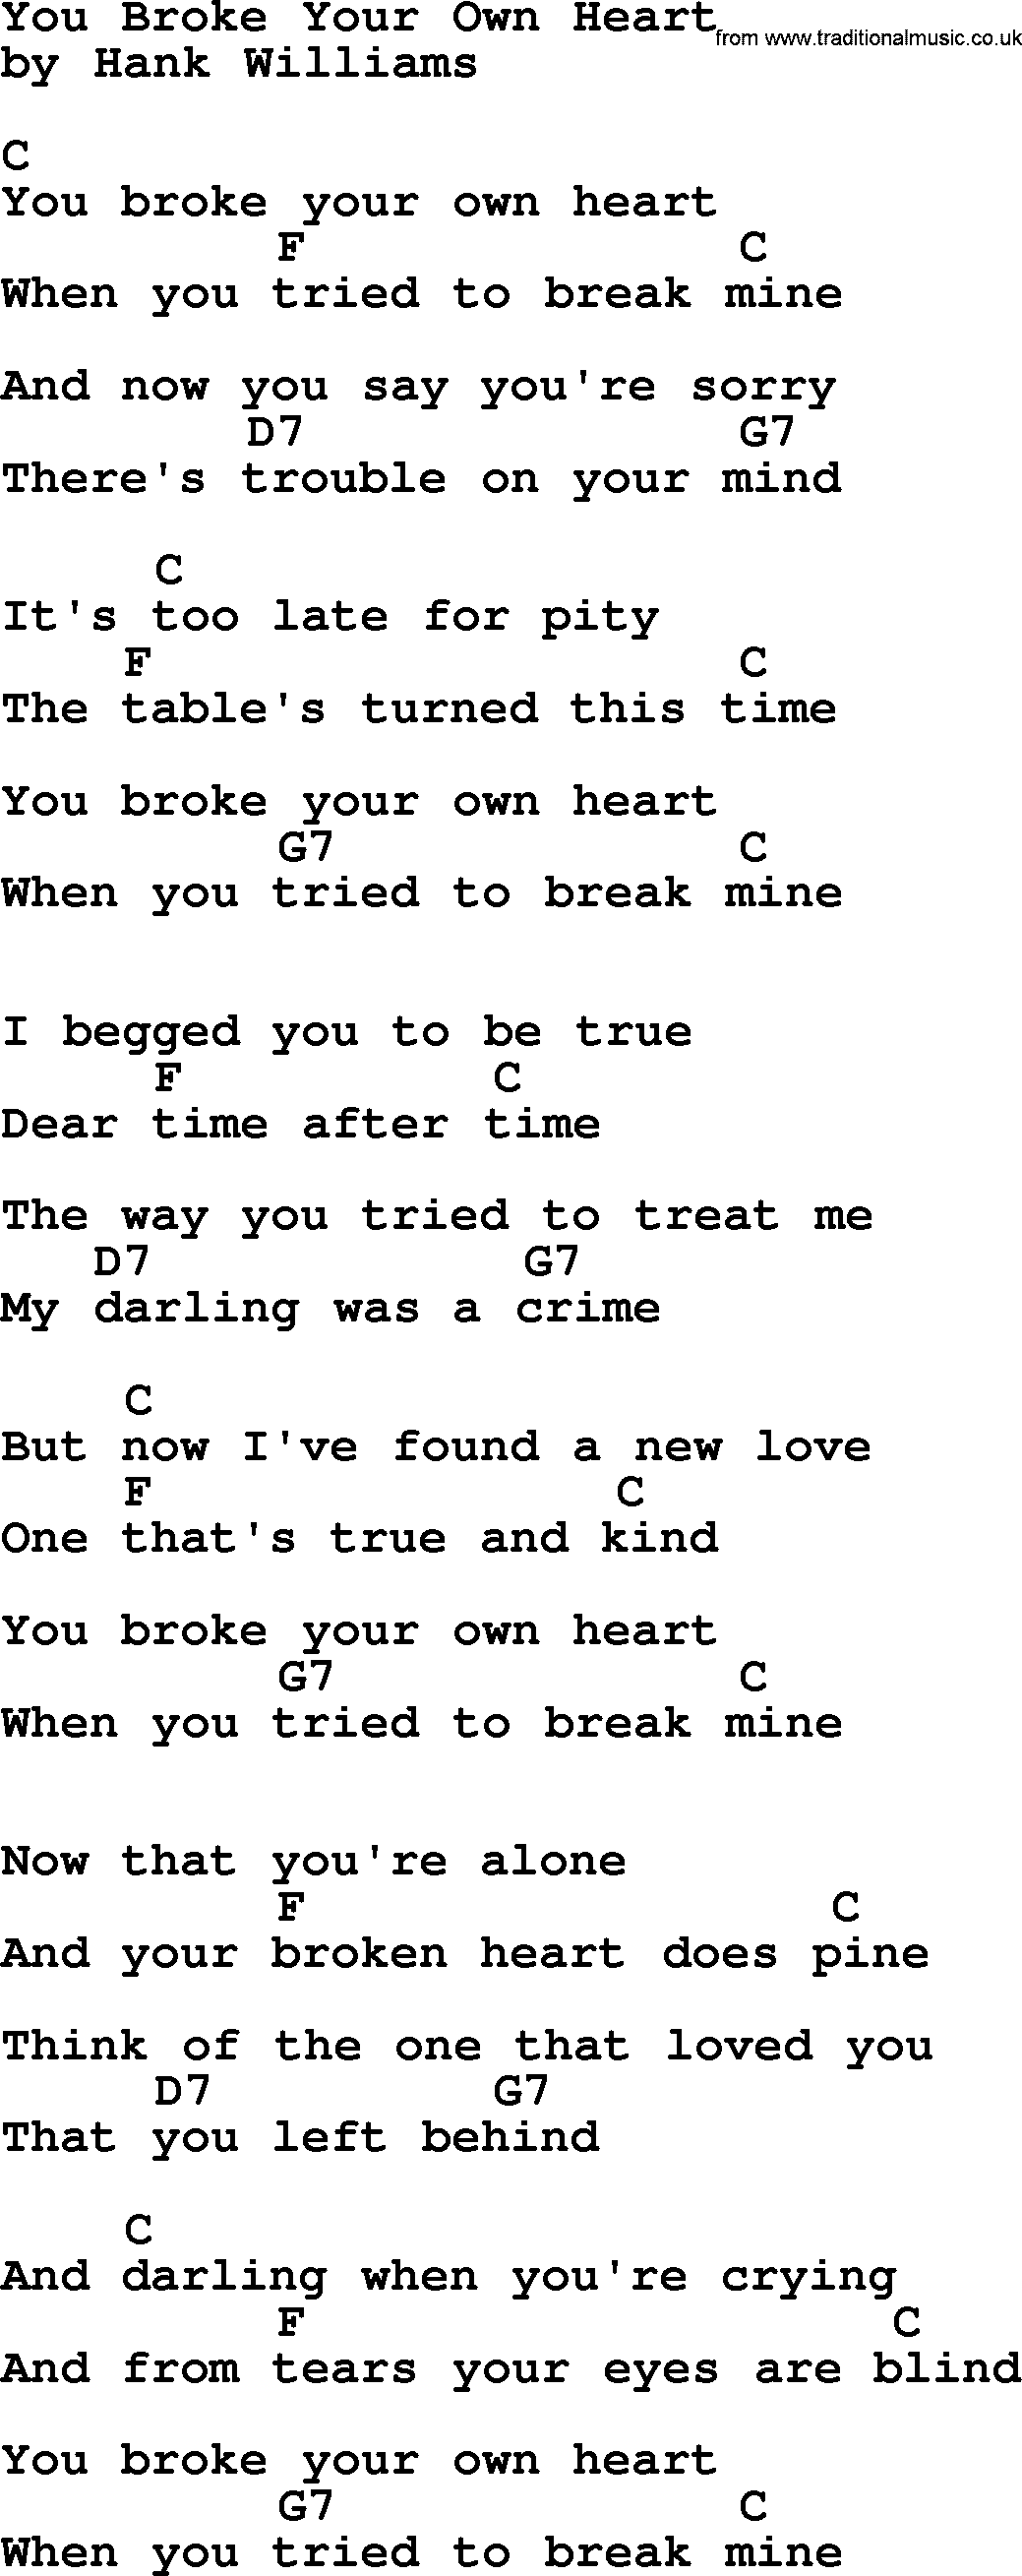 Hank Williams song You Broke Your Own Heart, lyrics and chords